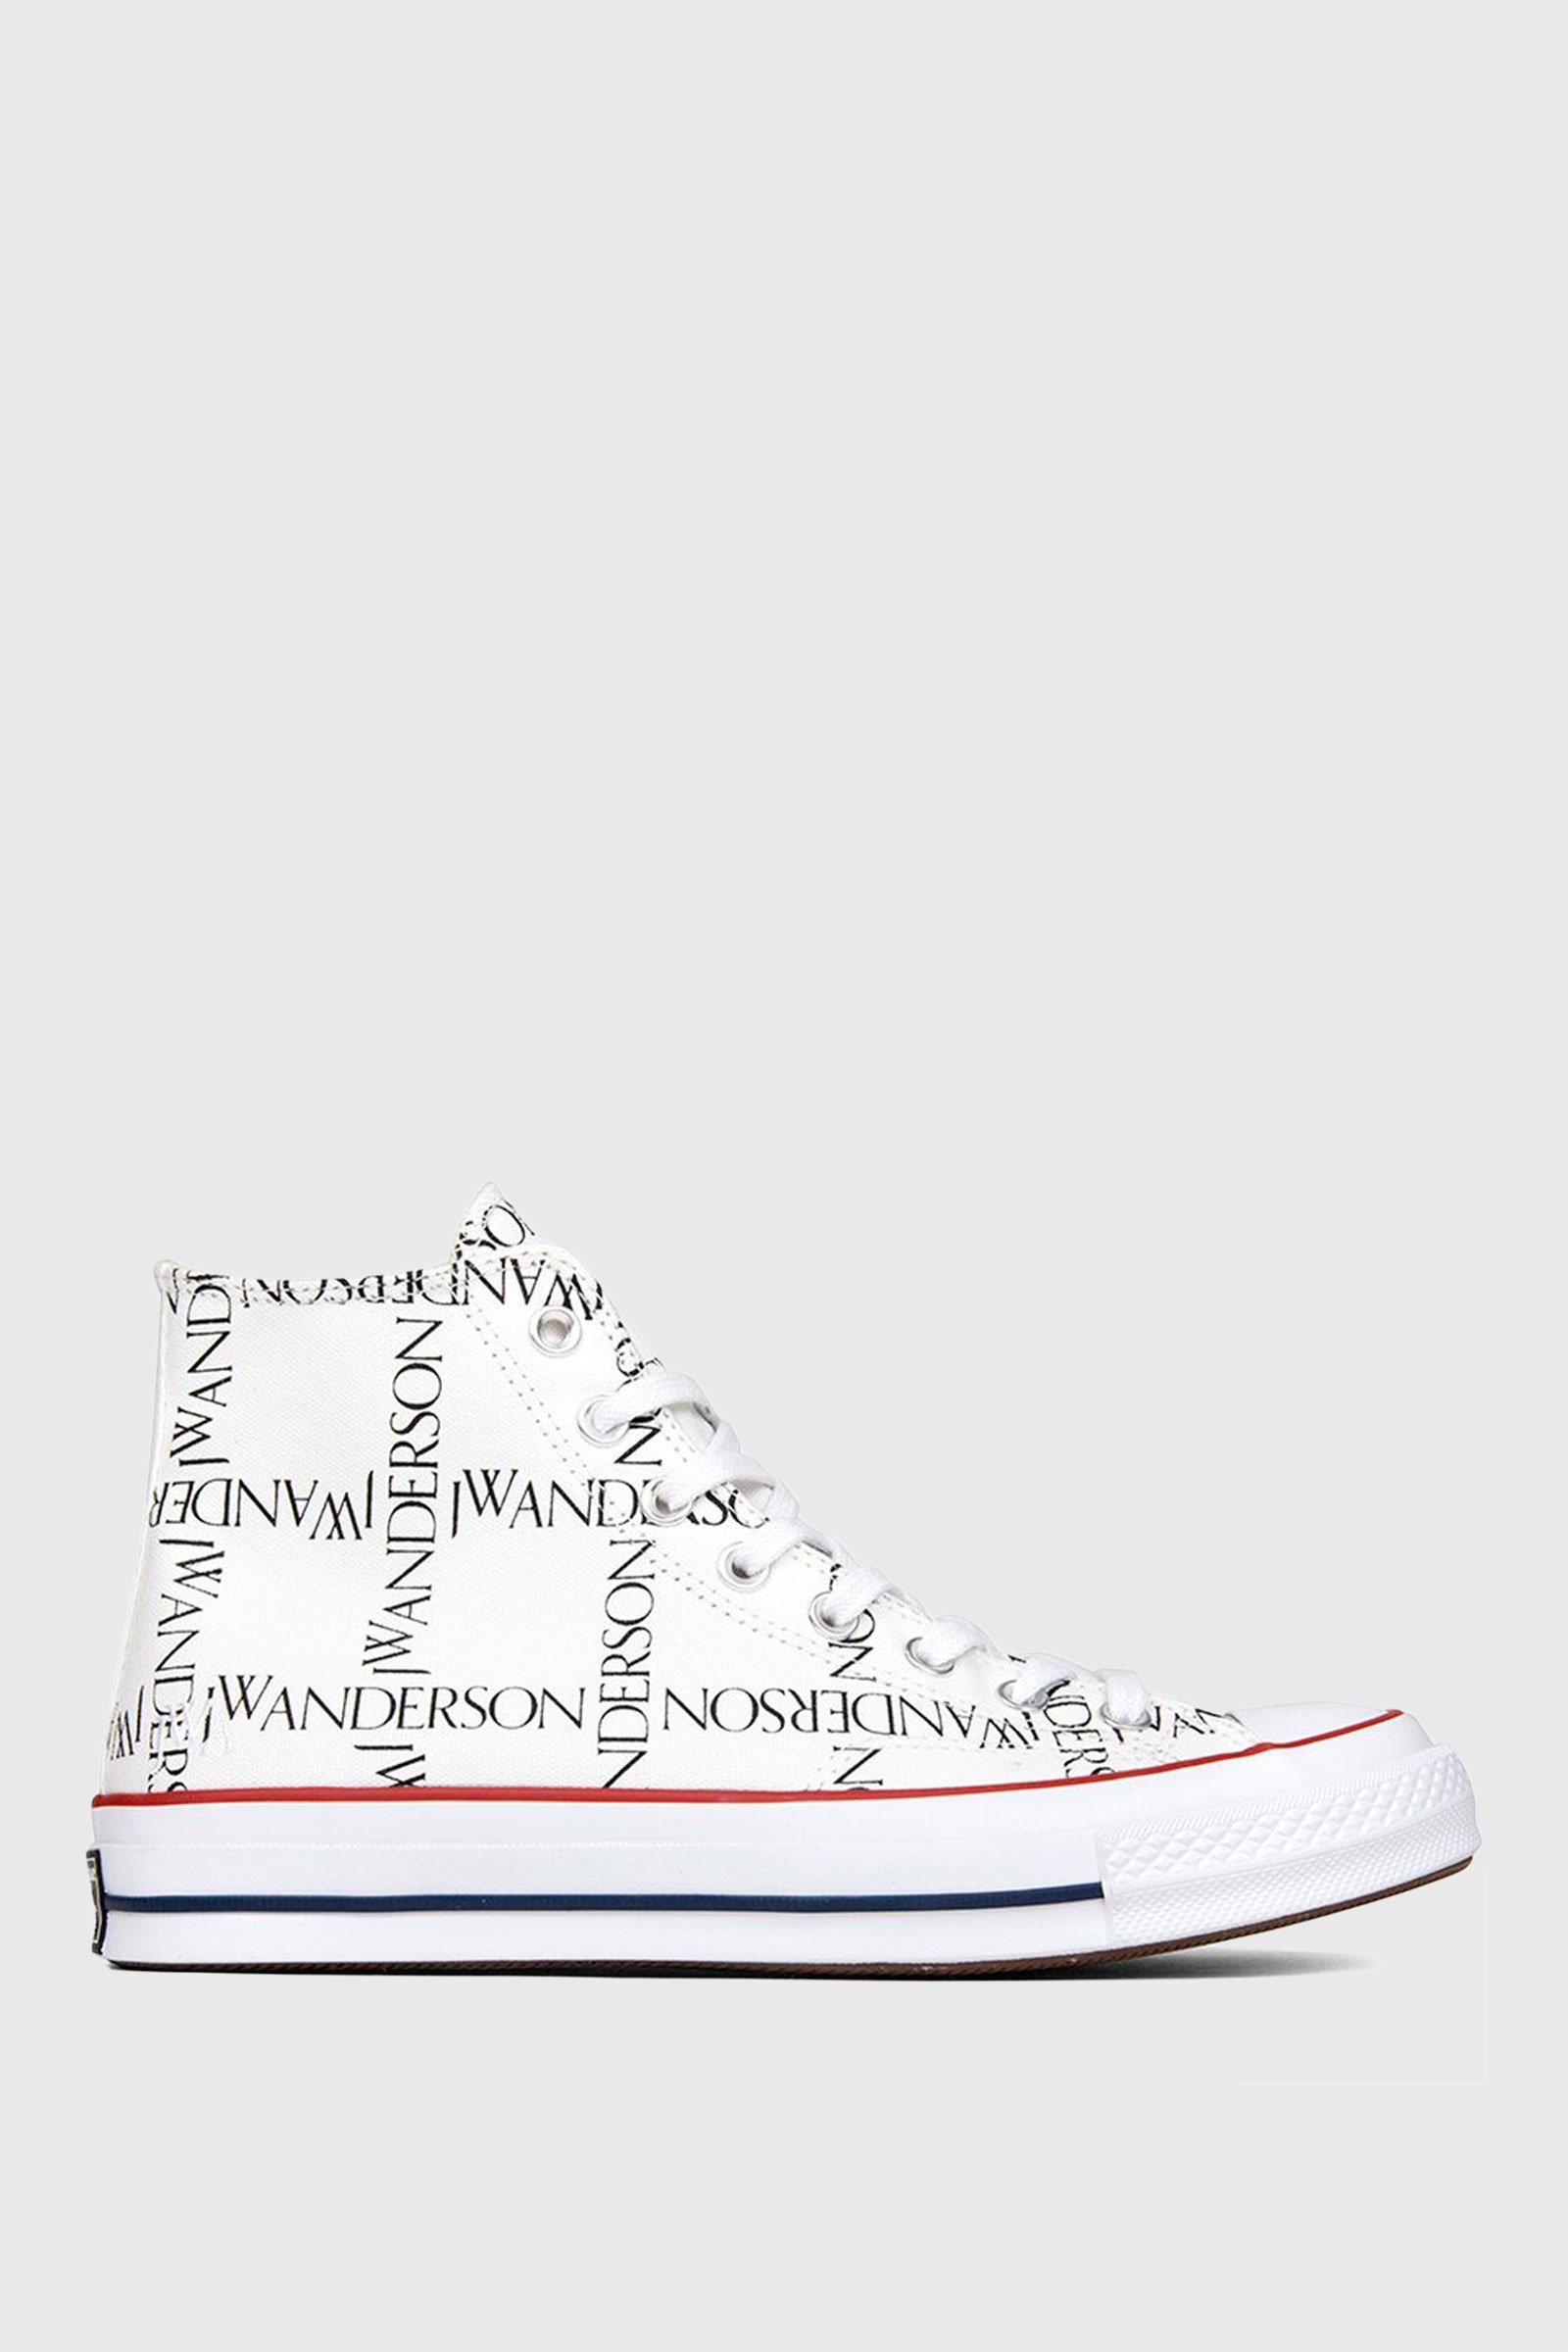 jw anderson converse sizing